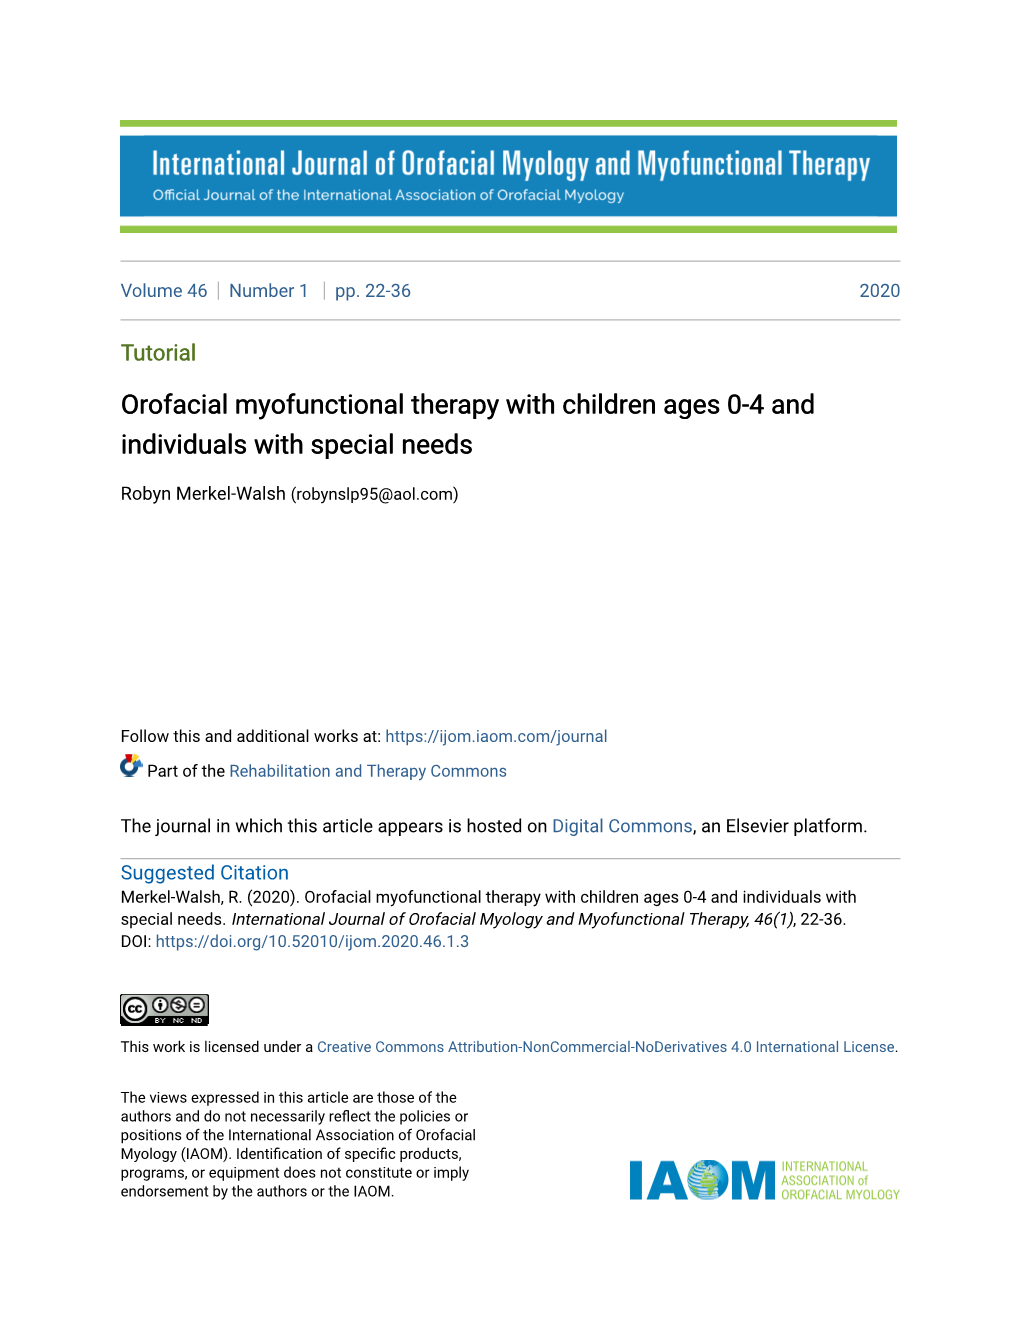 Orofacial Myofunctional Therapy with Children Ages 0-4 and Individuals with Special Needs